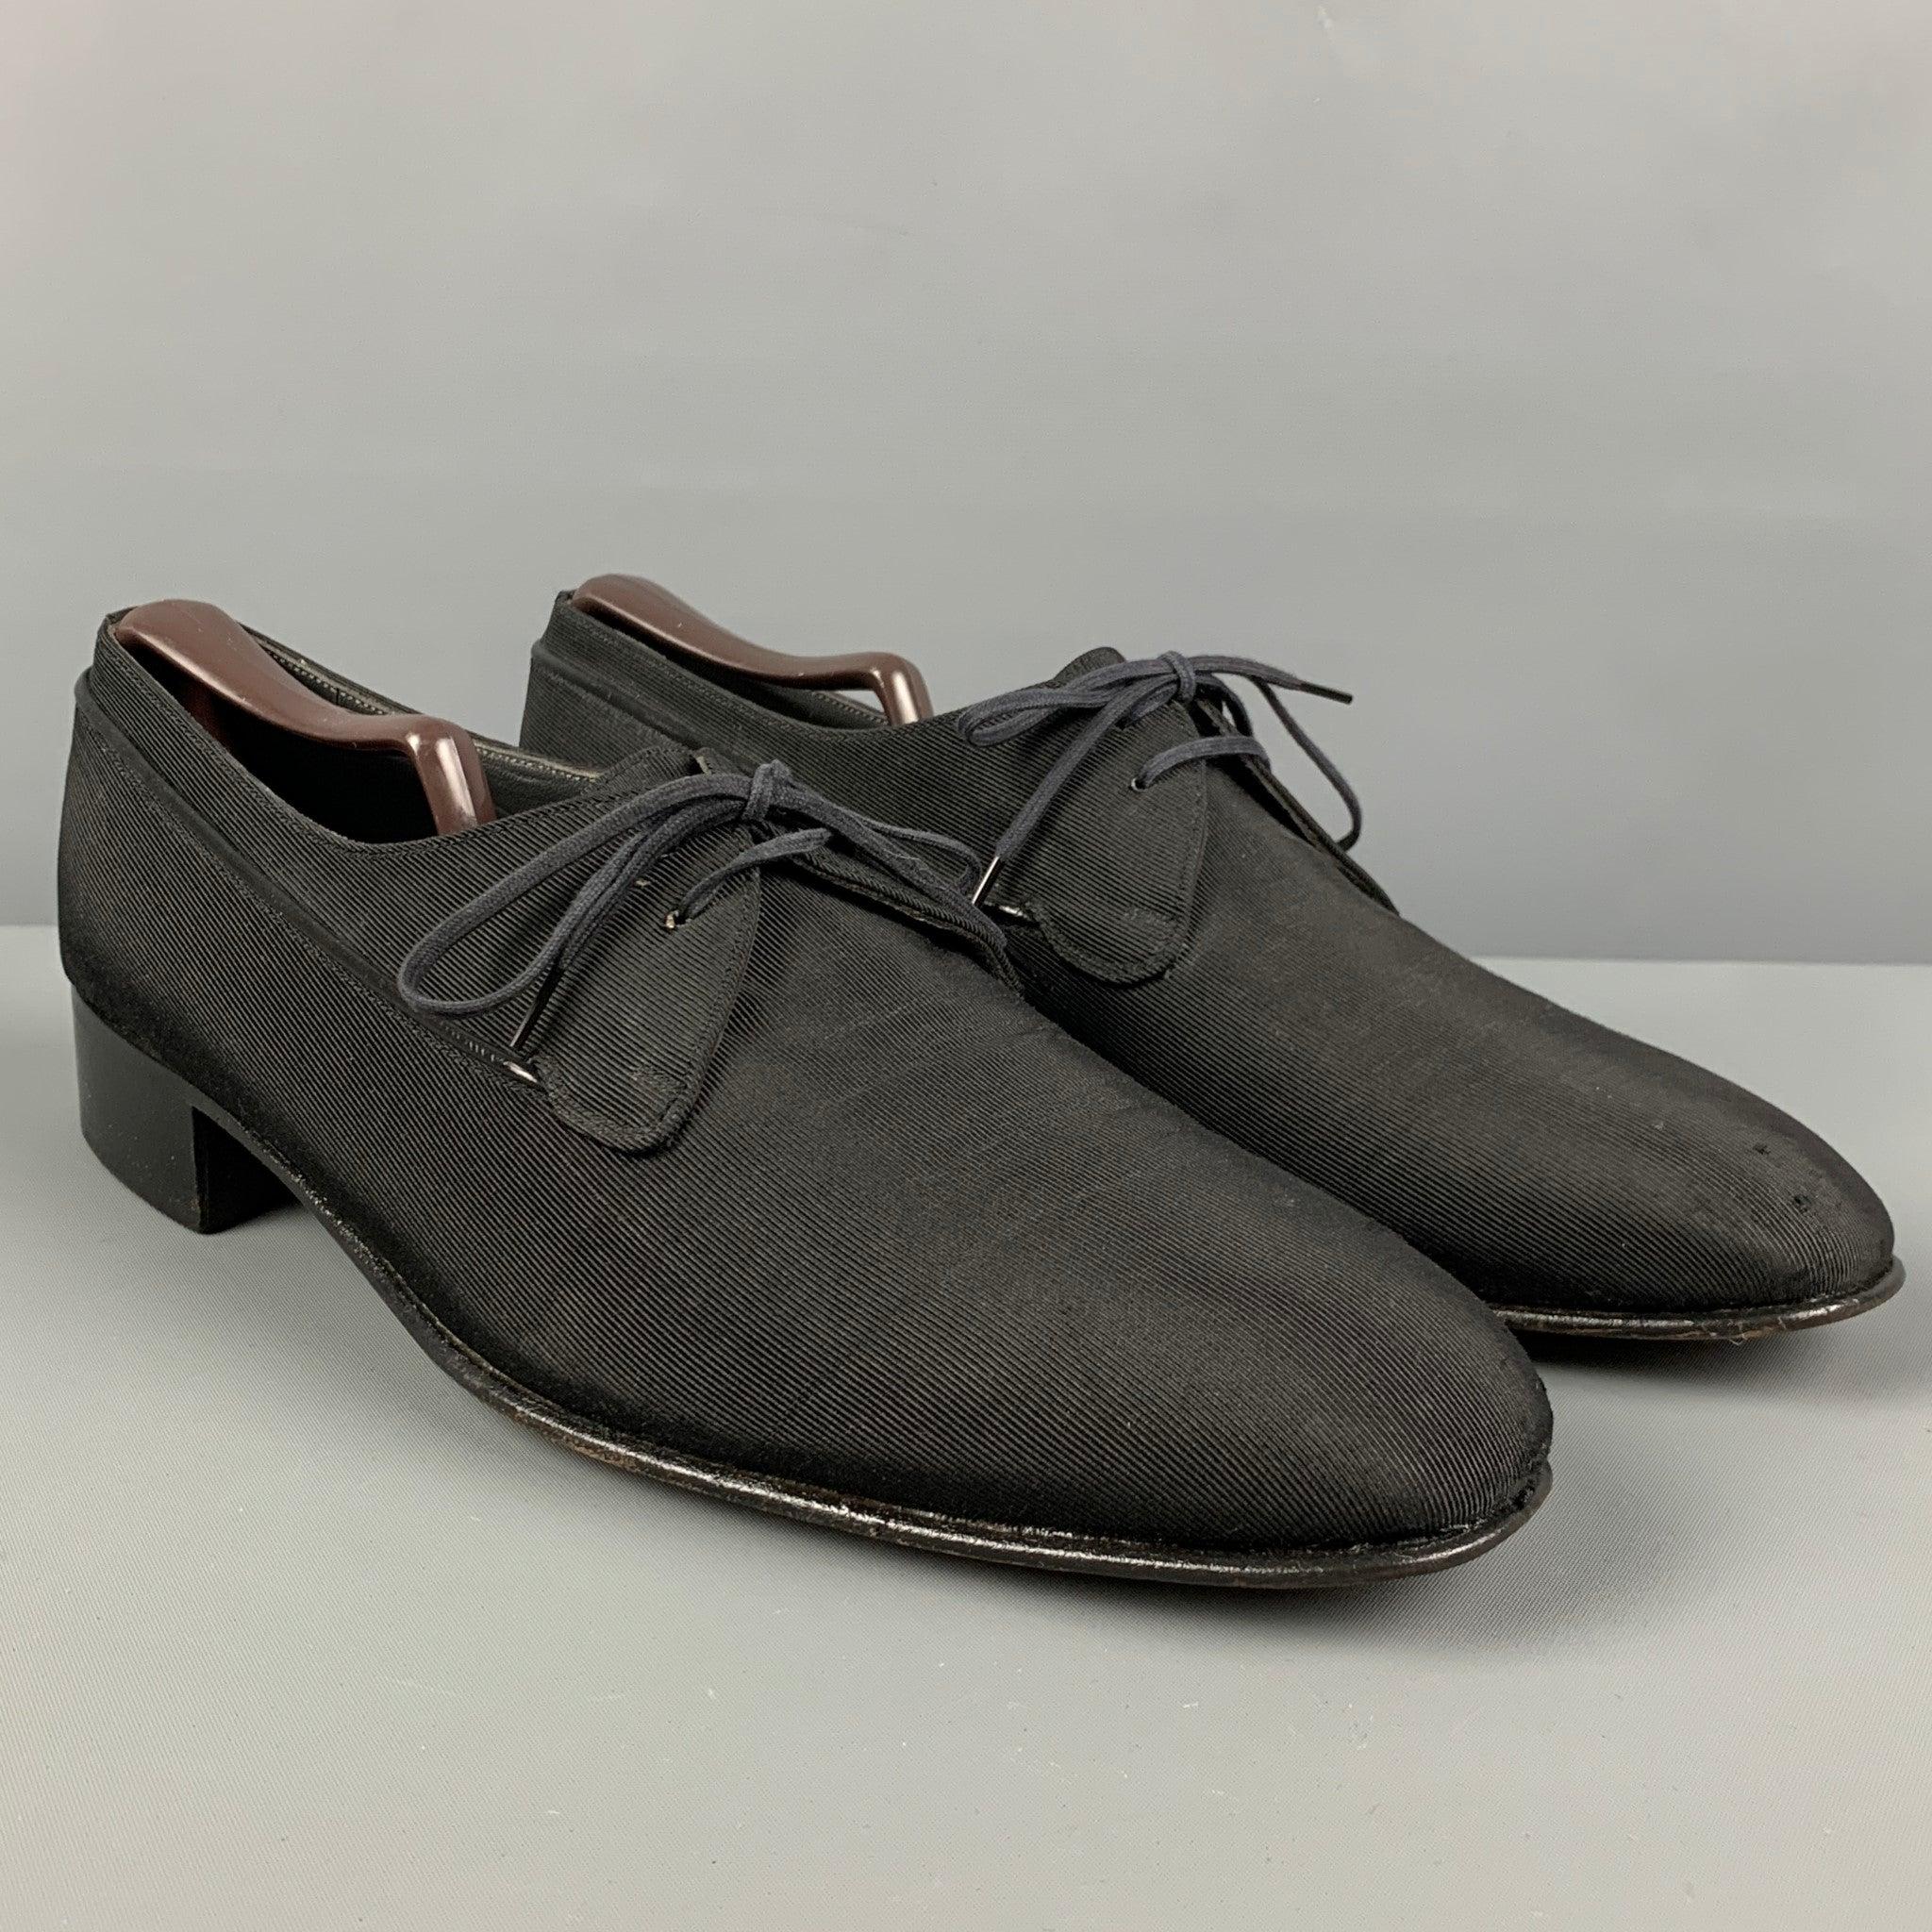 BALLY shoes comes in a black material featuring a square toe, leather trim, low heel, and a lace up closure.
Very Good
Pre-Owned Condition. 

Marked:   11.5 MOutsole: 12 inches  x 4 inches 
  
  
 
Reference: 121779
Category: Lace Up Shoes
More